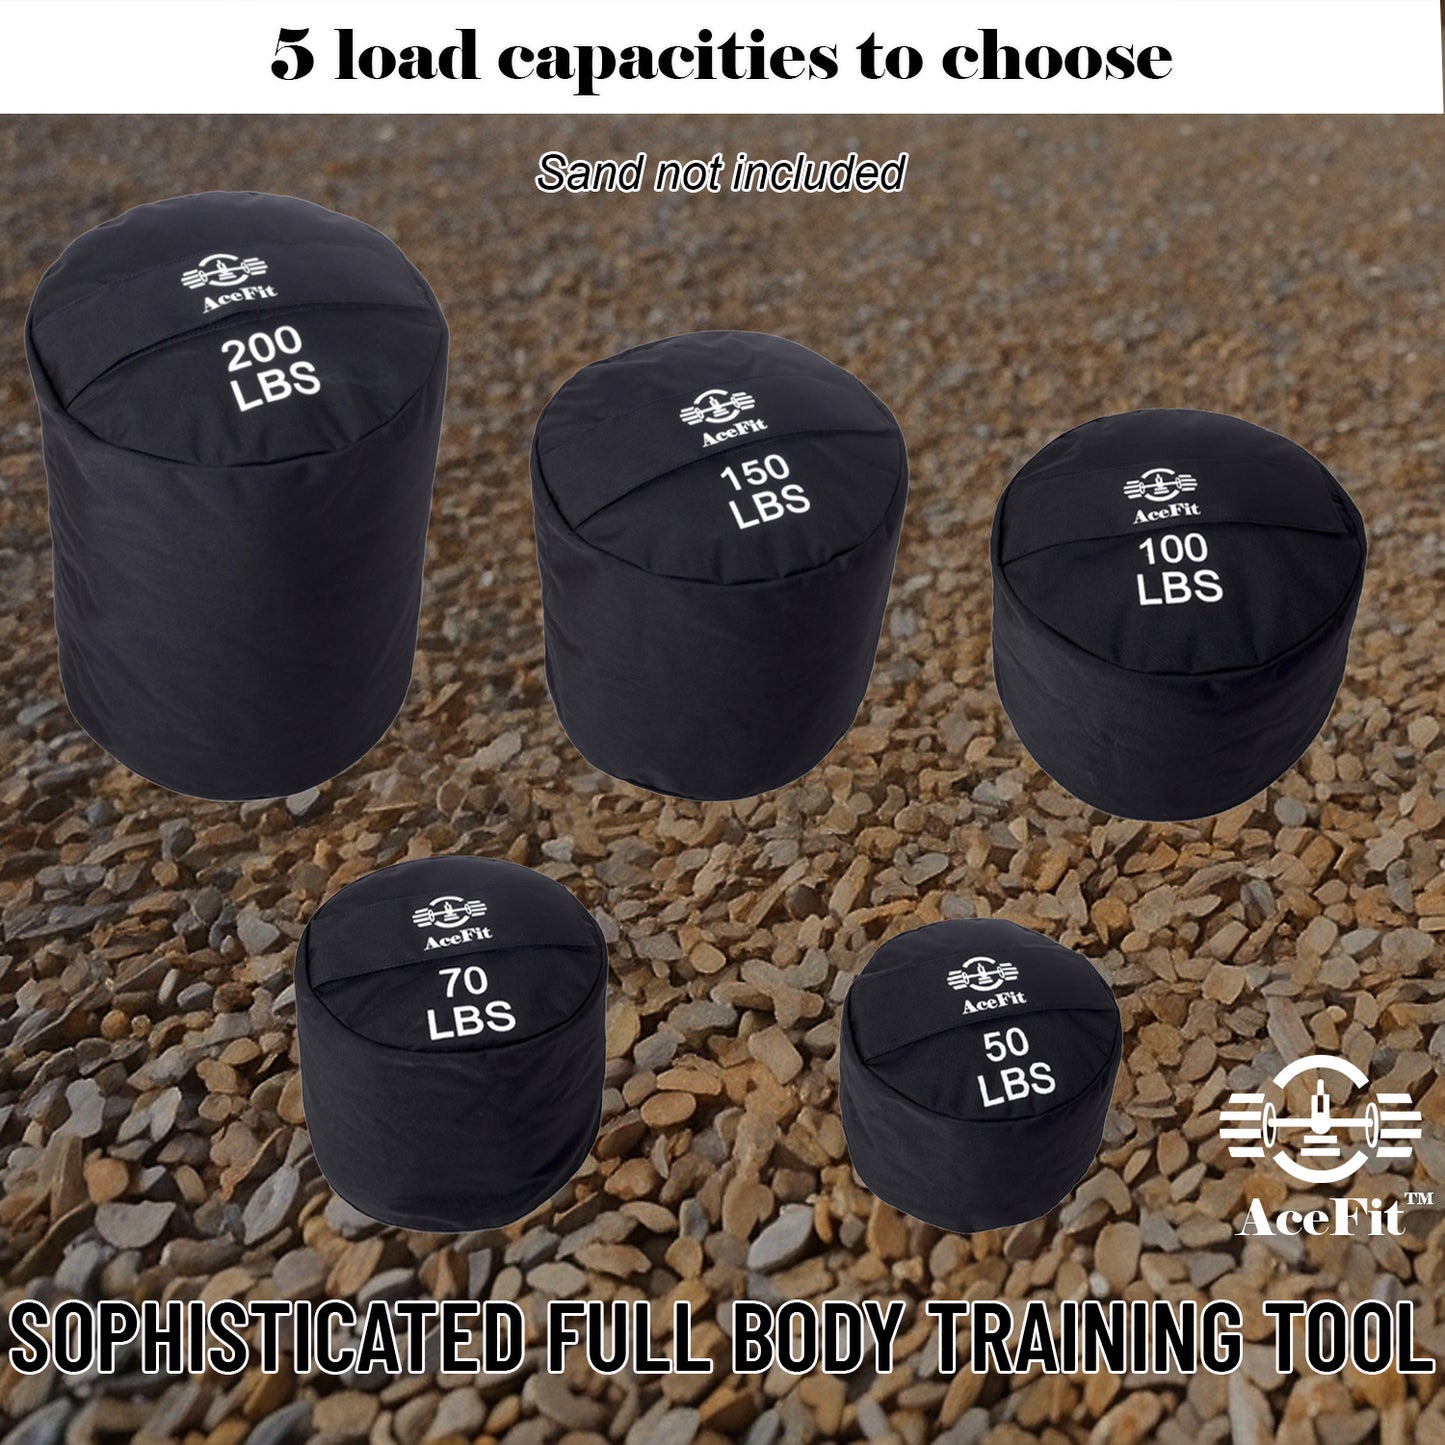 Heavy duty sandbags for working out